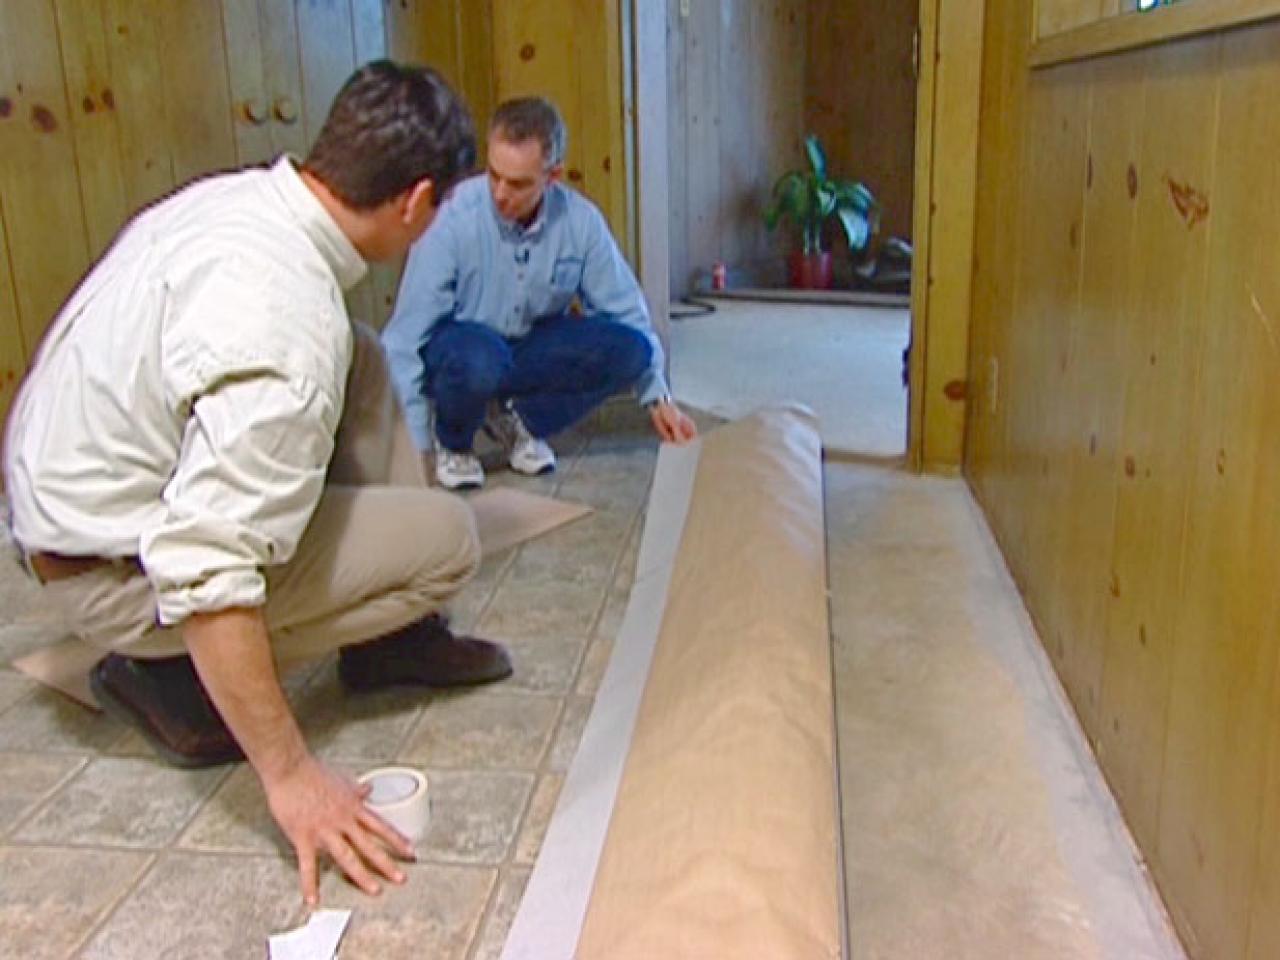 How To Install Vinyl Flooring Tos, How To Cut Vinyl Plank Flooring With Cork Backing